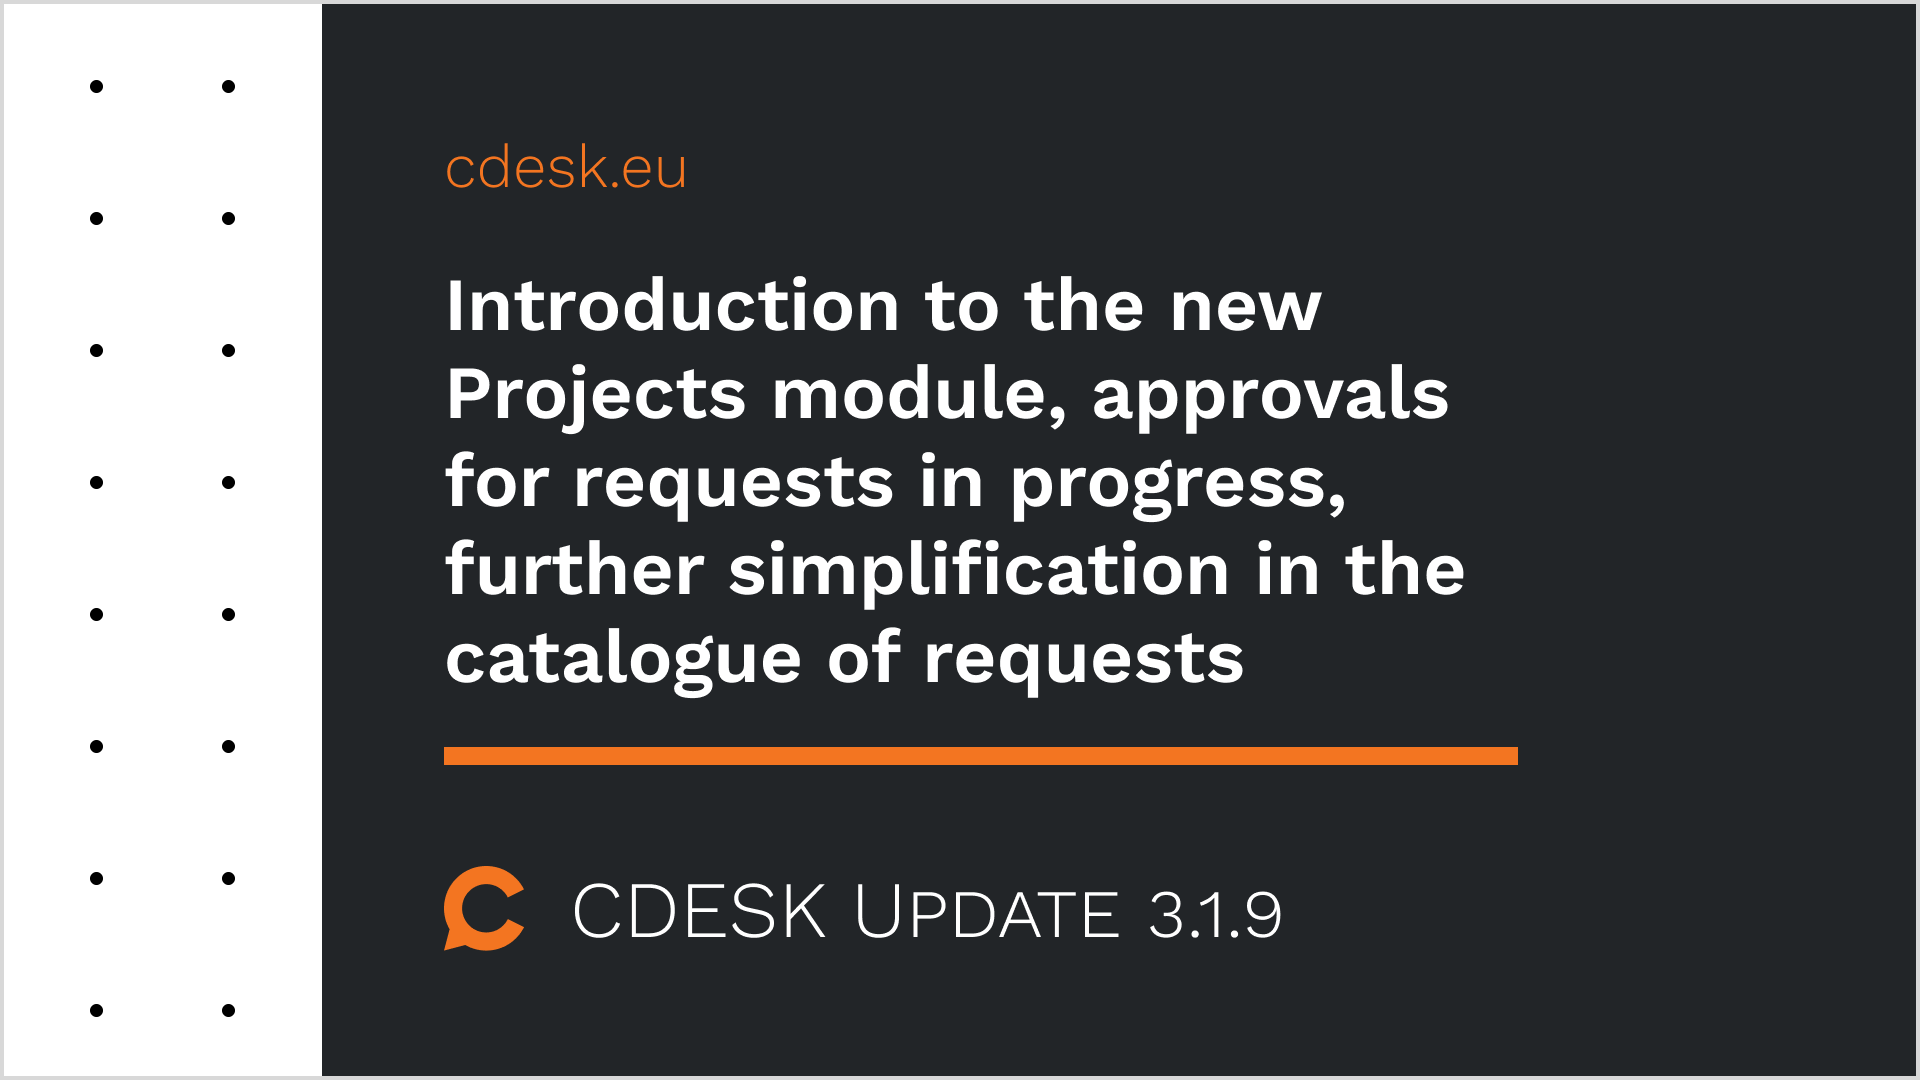 Introduction to the new Projects module, approvals for requests in progress, further simplification in the catalogue of requests